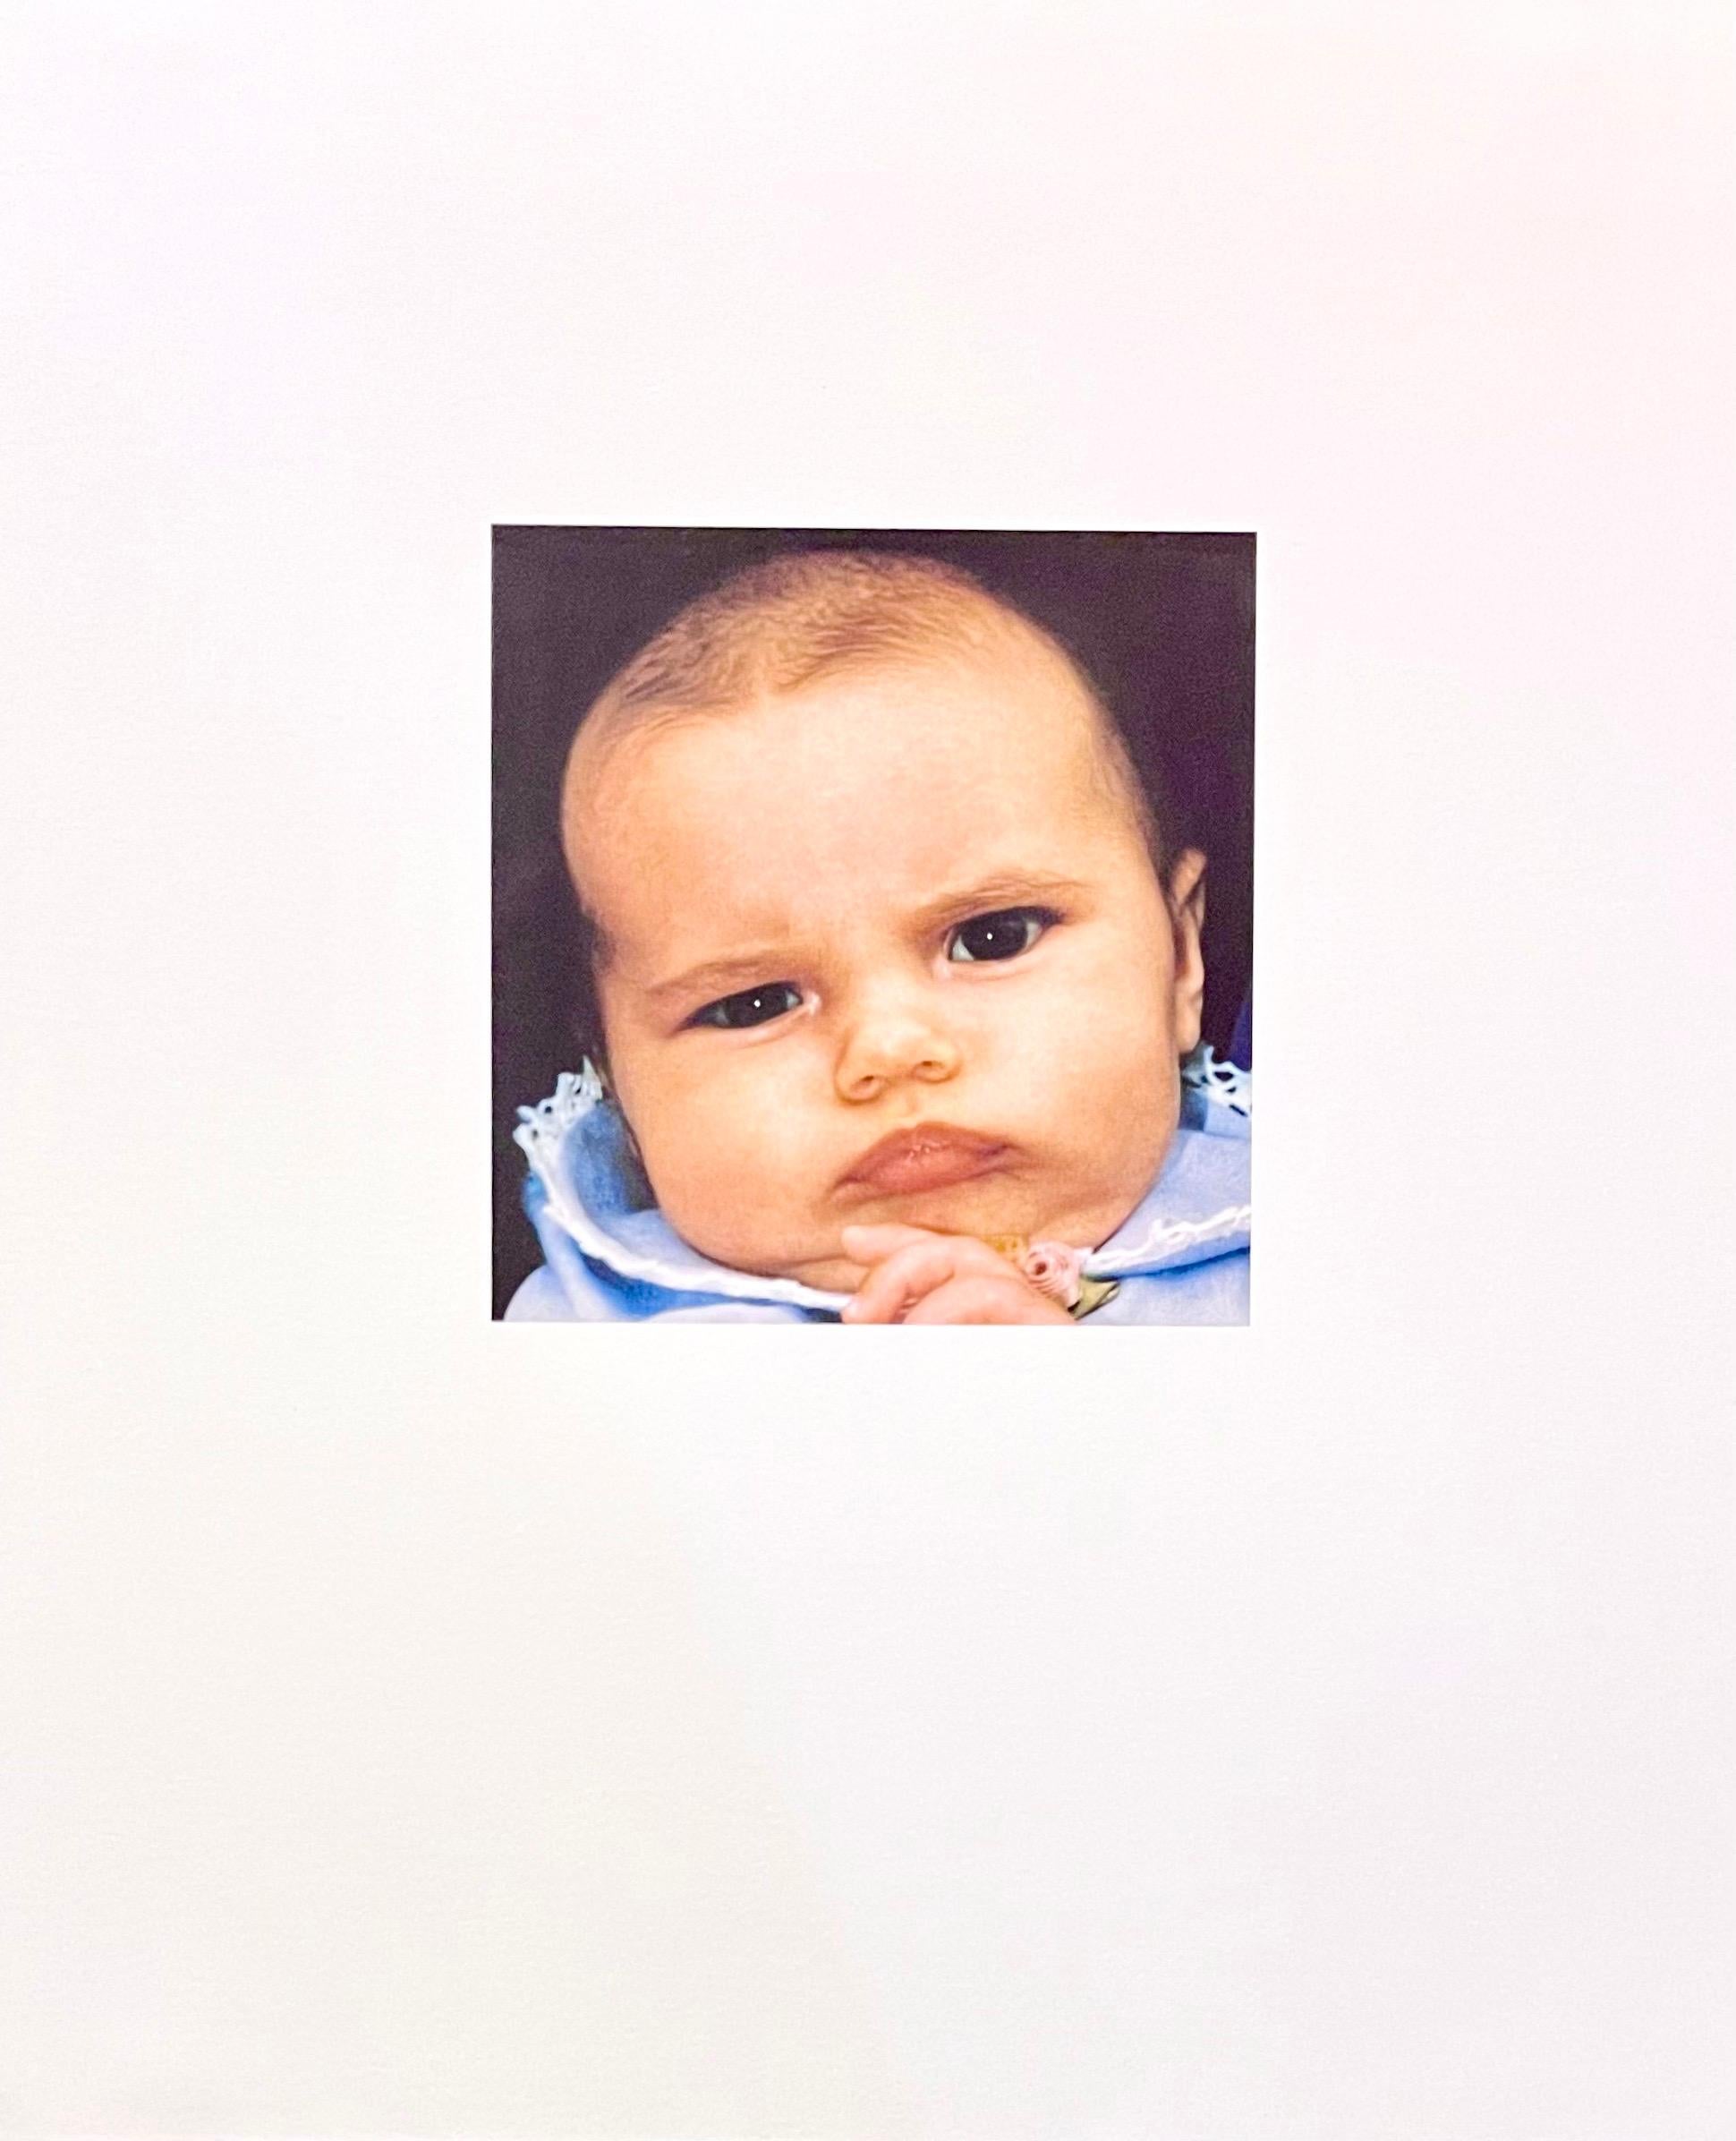 JoAnn Callis (1940- American, Contemporary) 
Baby
Color photograph, hand signed in pencil en verso, dated 2000, and numbered 4/200 
Upon magnification, it appears to be some kind of digital print, similar to a half-tone, but composed of fine lines